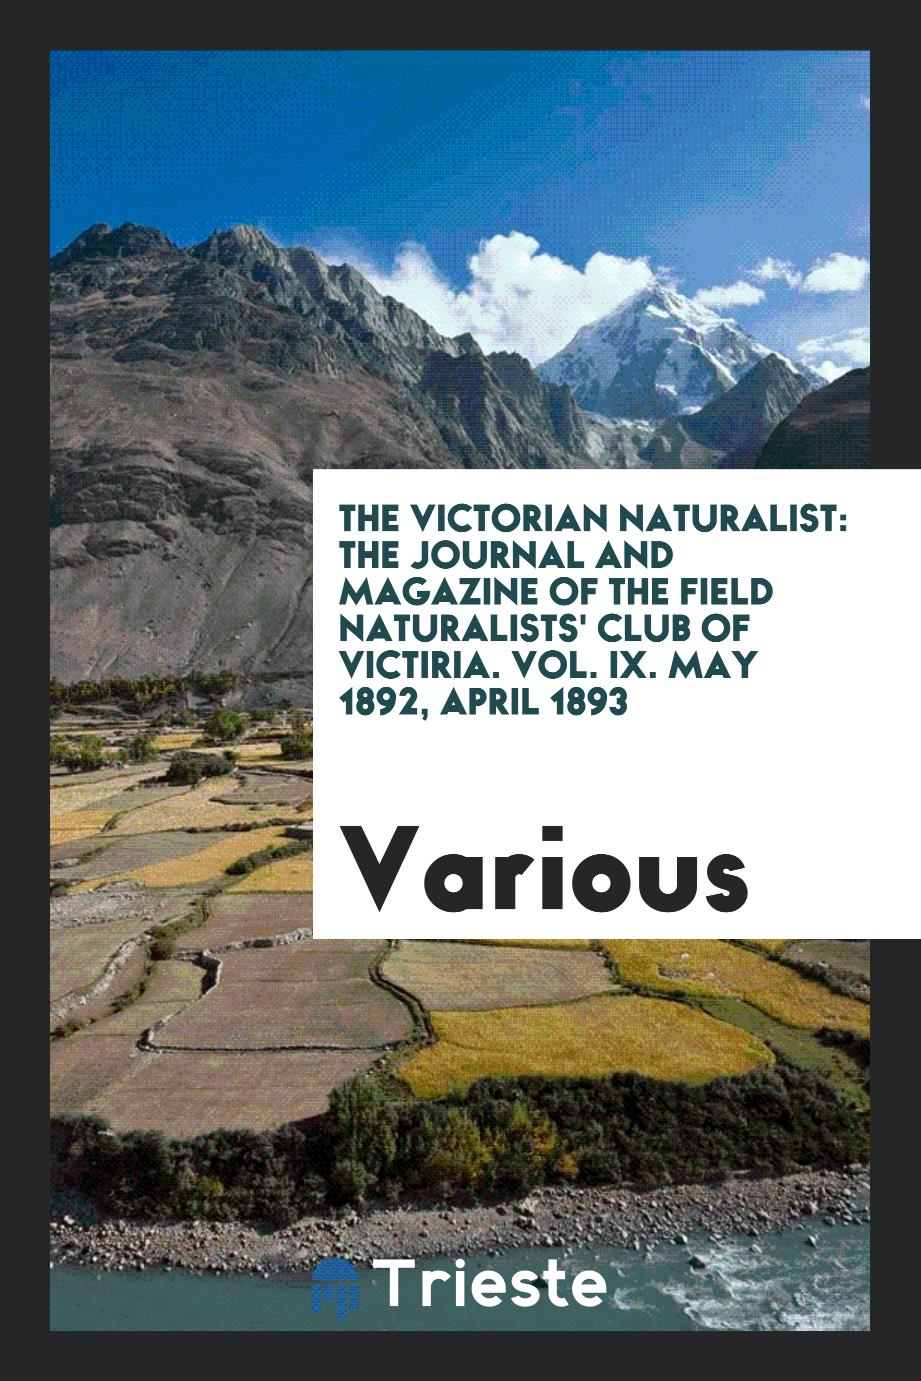 The Victorian naturalist: the journal and magazine of the field Naturalists' Club of Victiria. Vol. IX. May 1892, April 1893